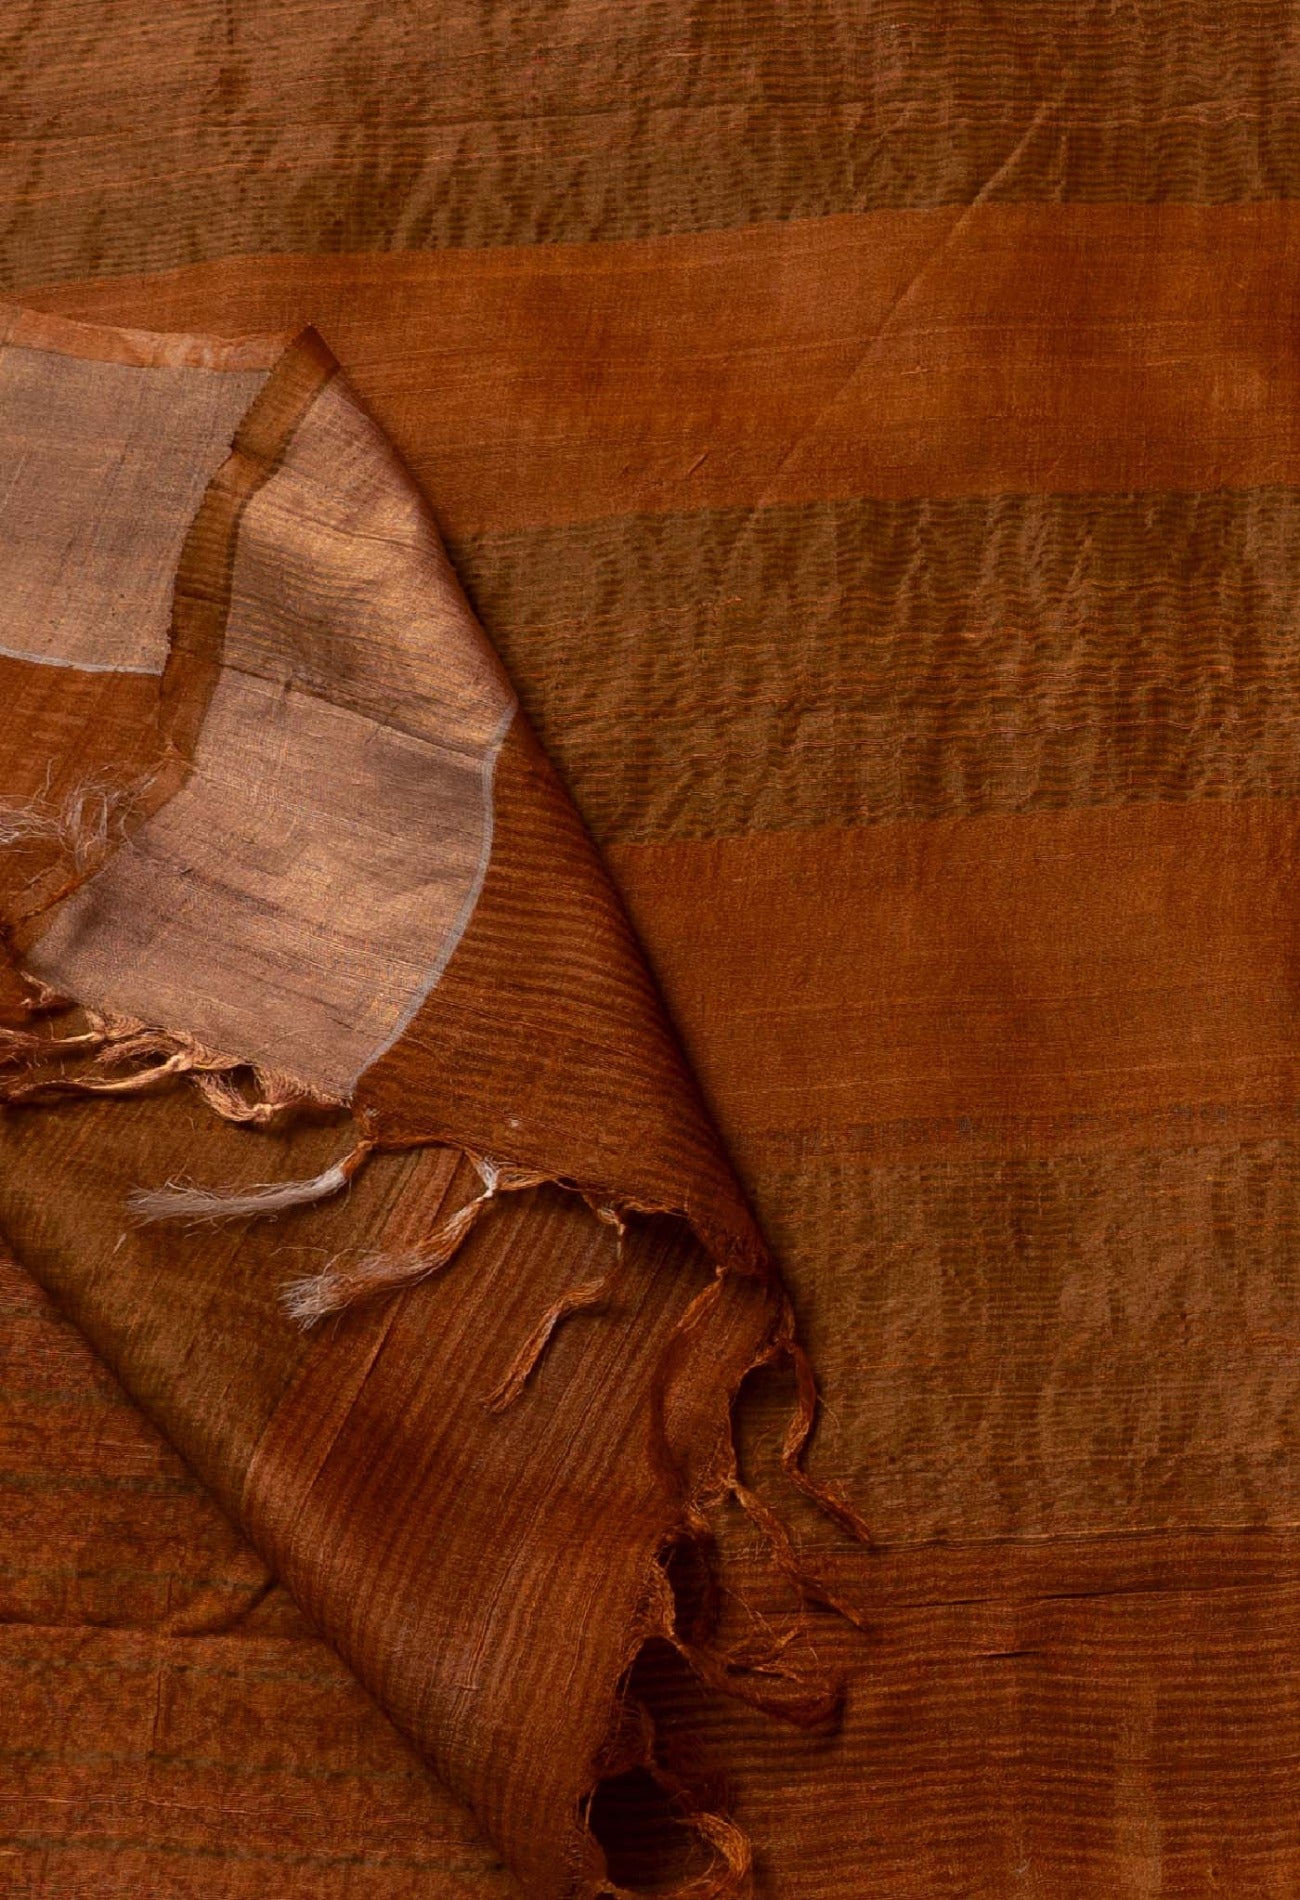 Online Shopping for Multi Pure Handloom Bengal Tussar  Silk Saree with Hand Block Prints from West Bengal at Unnatisilks.com India
